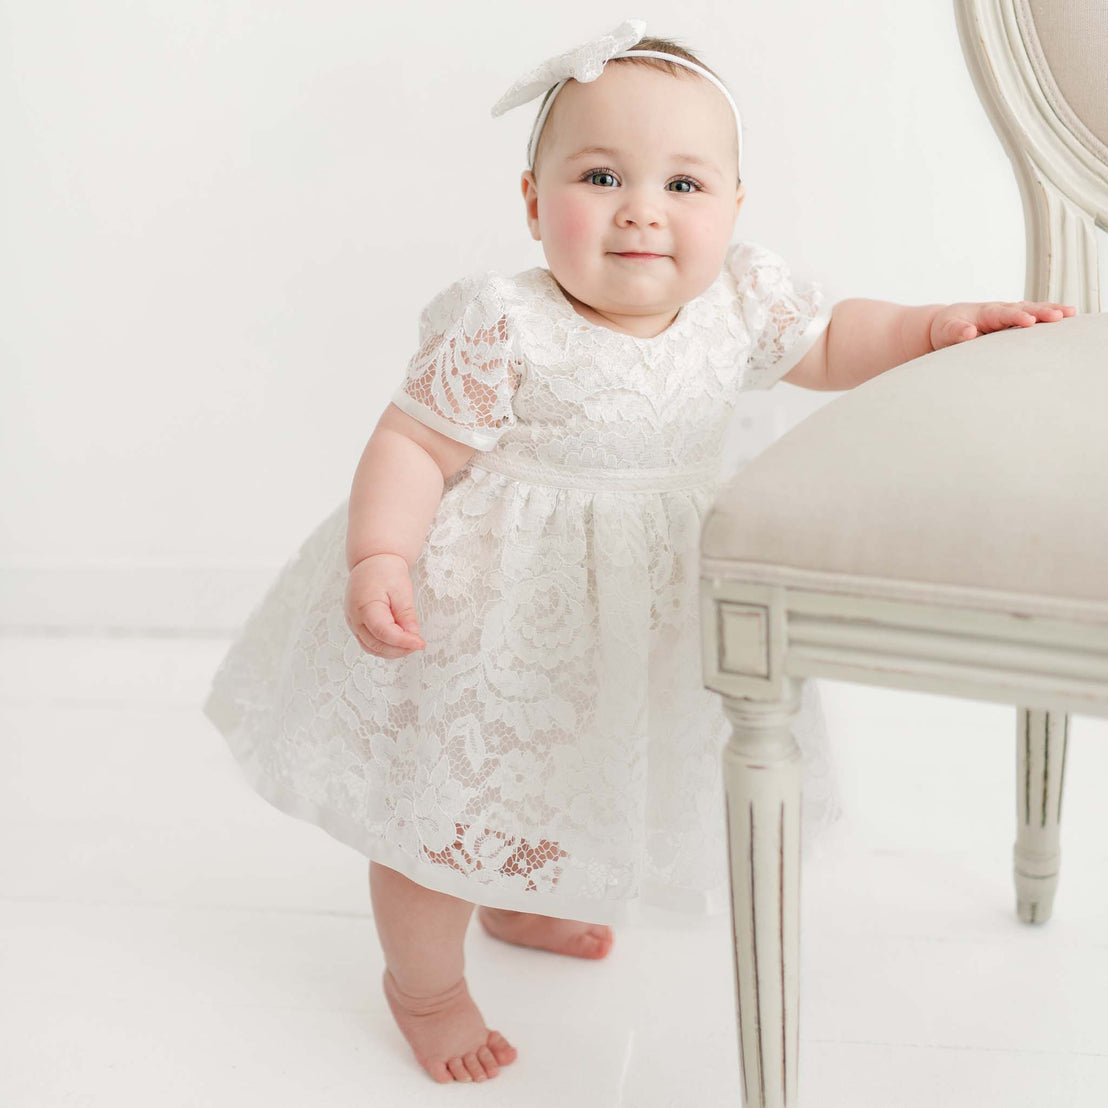 A baby girl in the Rose Romper Dress and Rose Bow Headband stands next to a beige chair in a bright room, smiling at the camera.